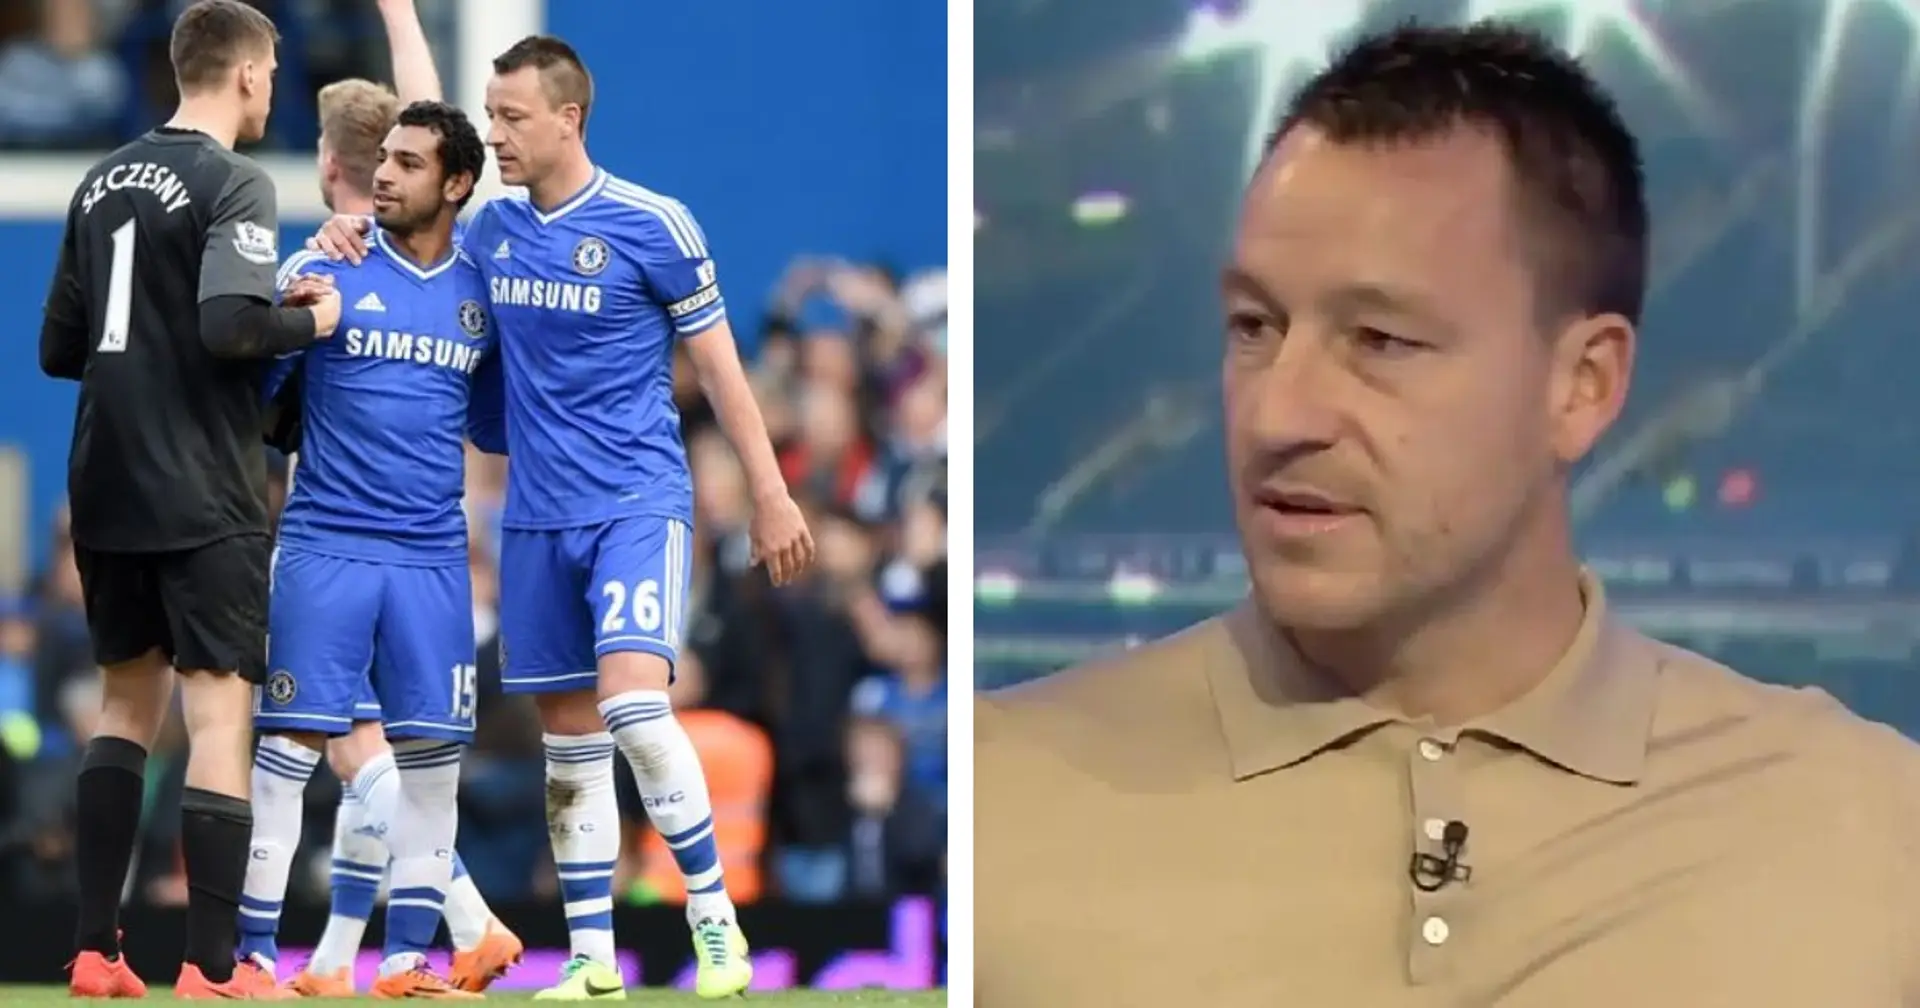 'I’m disappointed in myself as captain, that’s a regret I have': Terry makes Salah admission